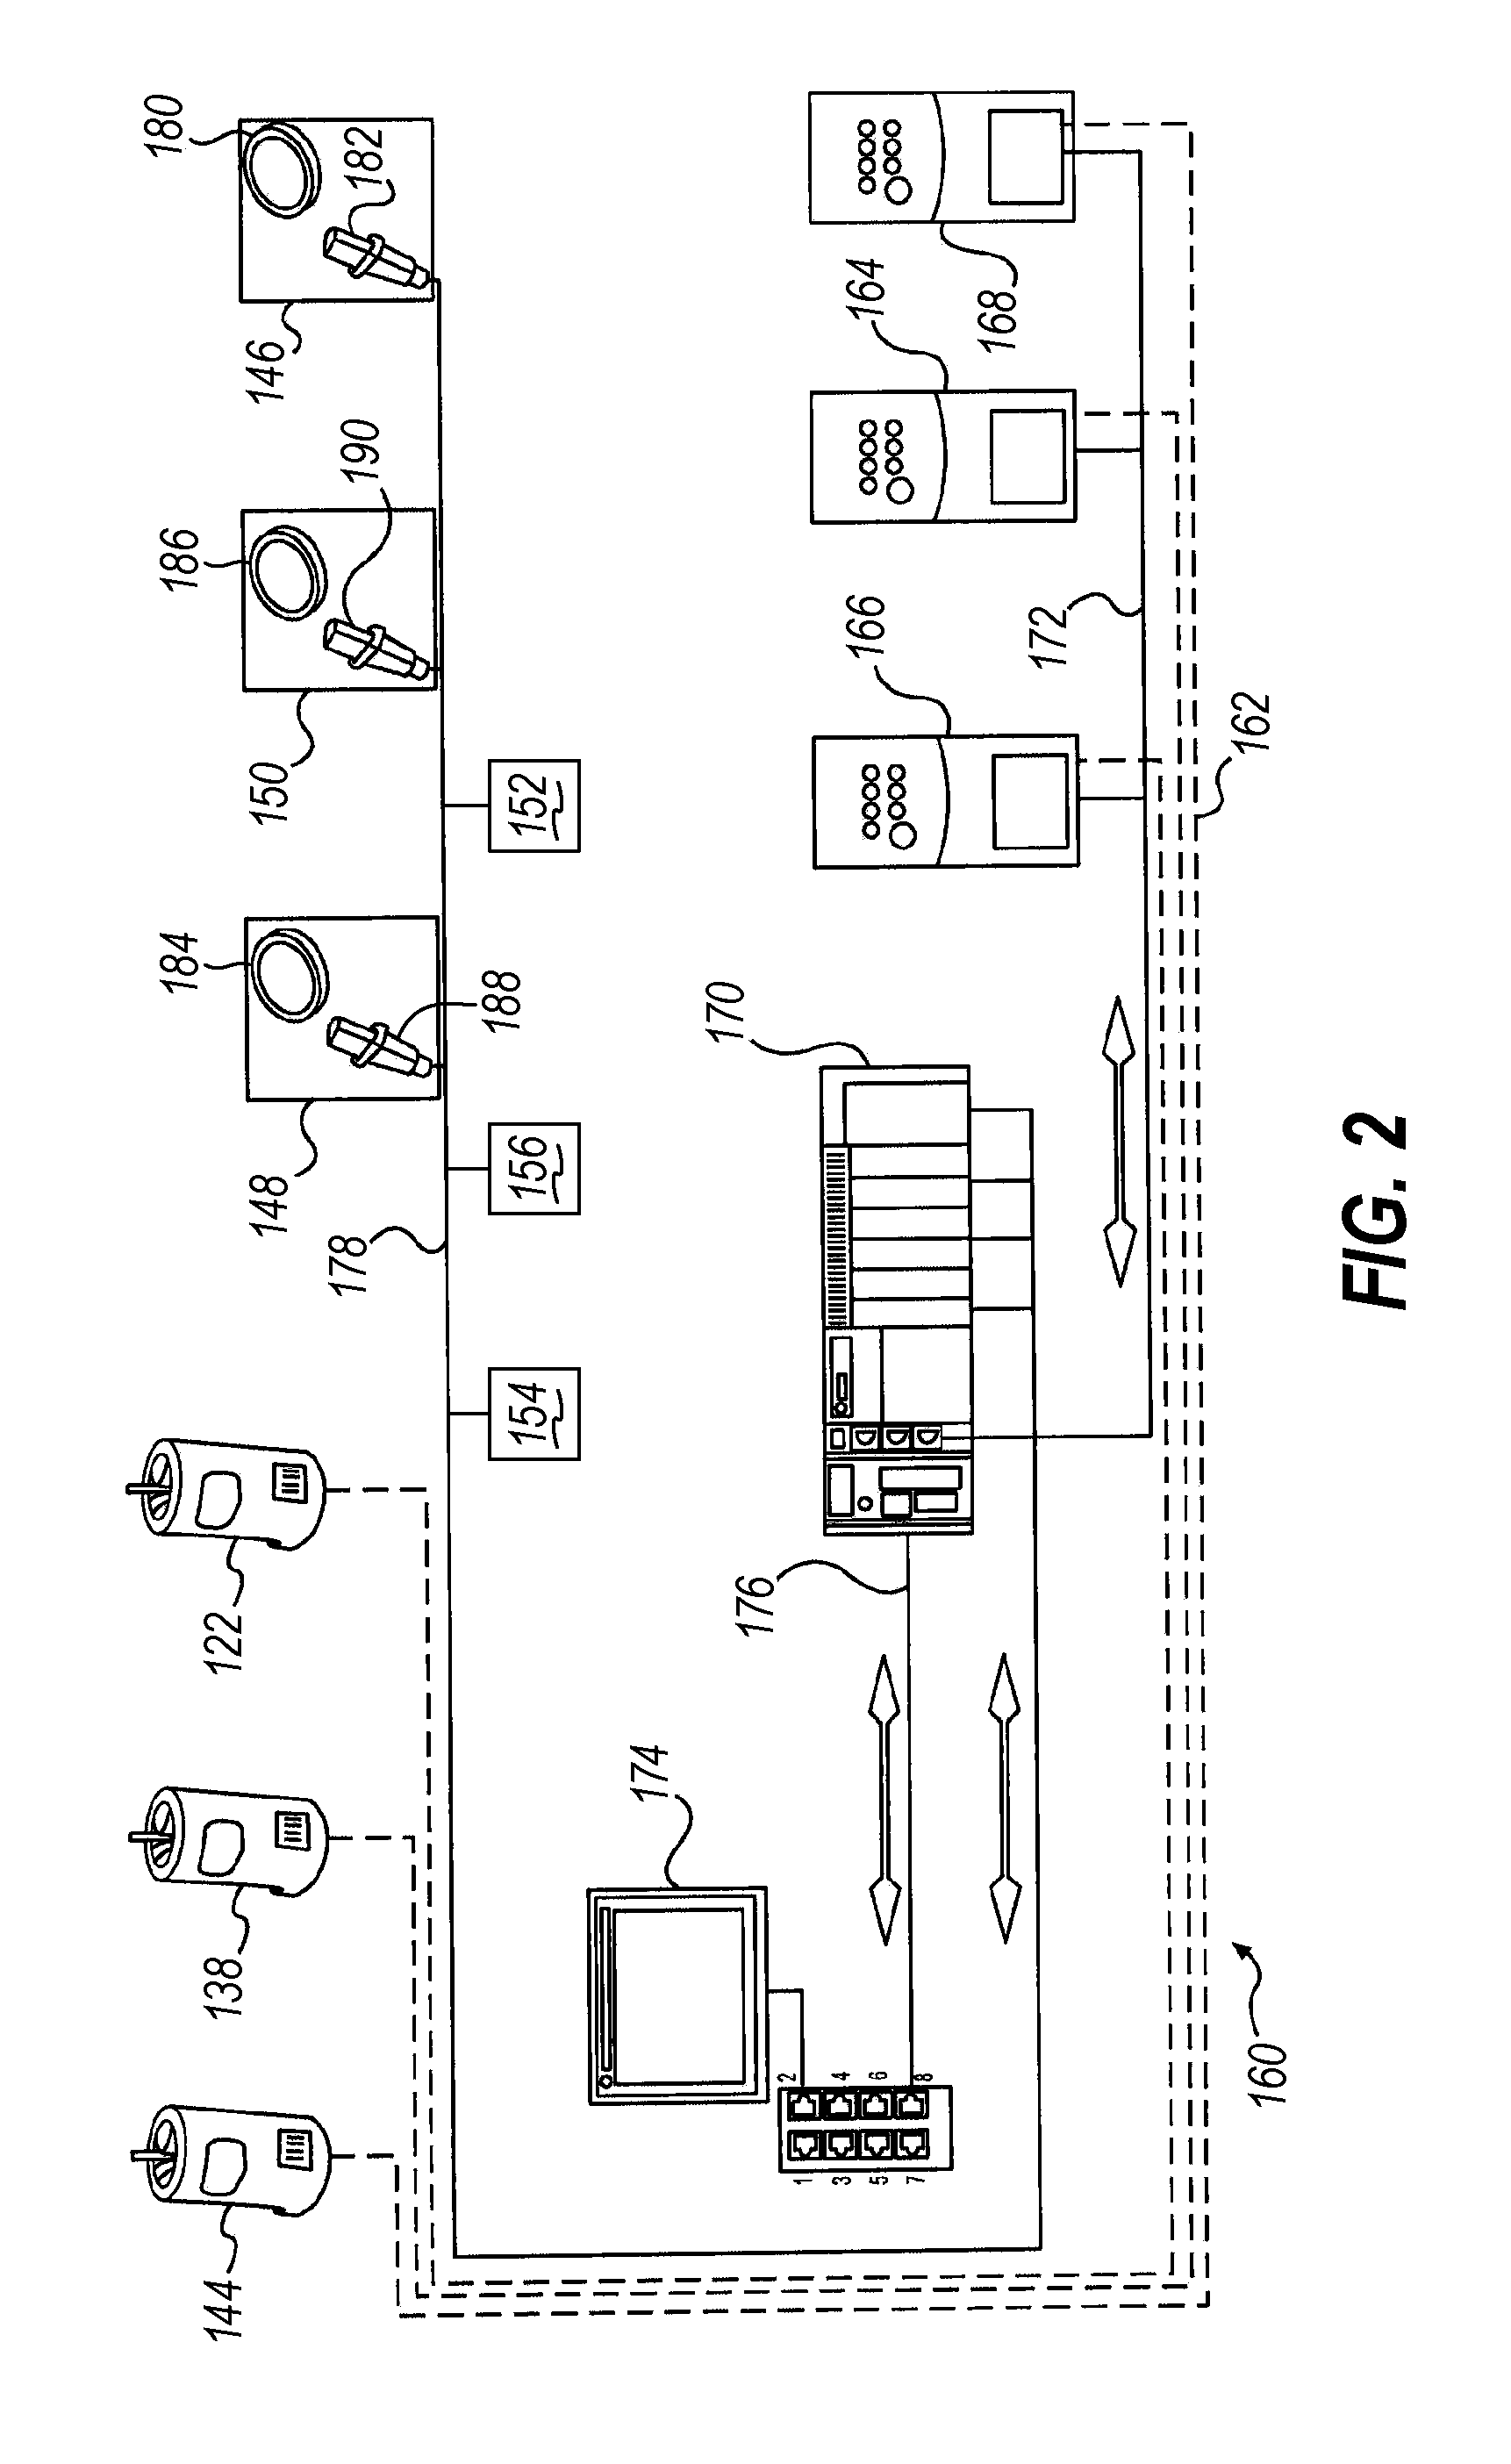 Dynamic Adjustment of Wrap Force Parameter Responsive to Monitored Wrap Force and/or For Film Break Reduction